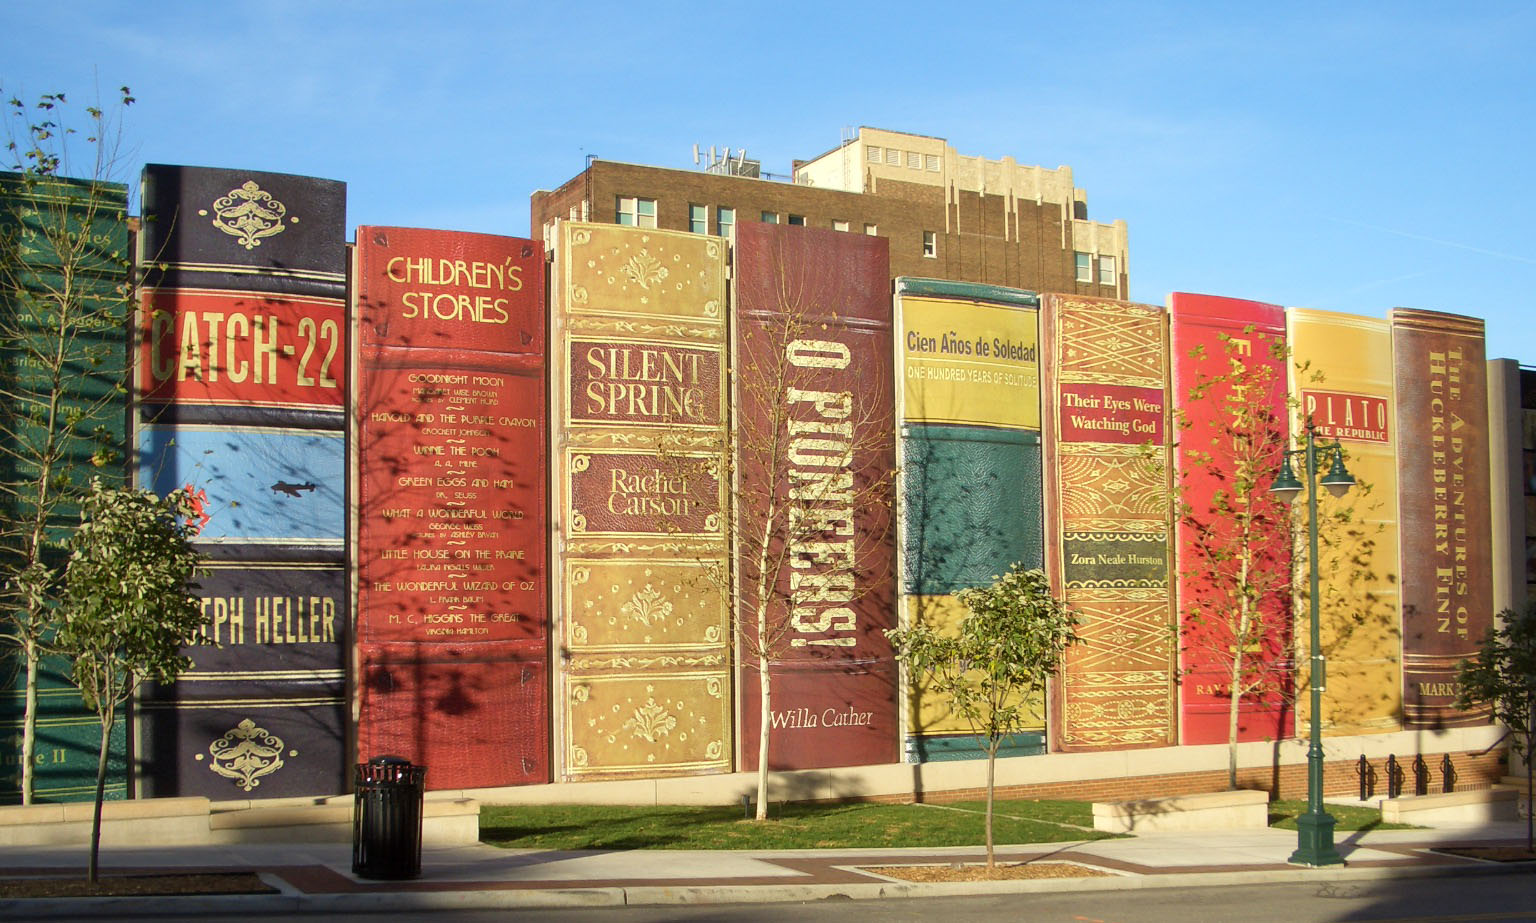 Kansas City Public Library Garage Concealed by Giant Wall of Books